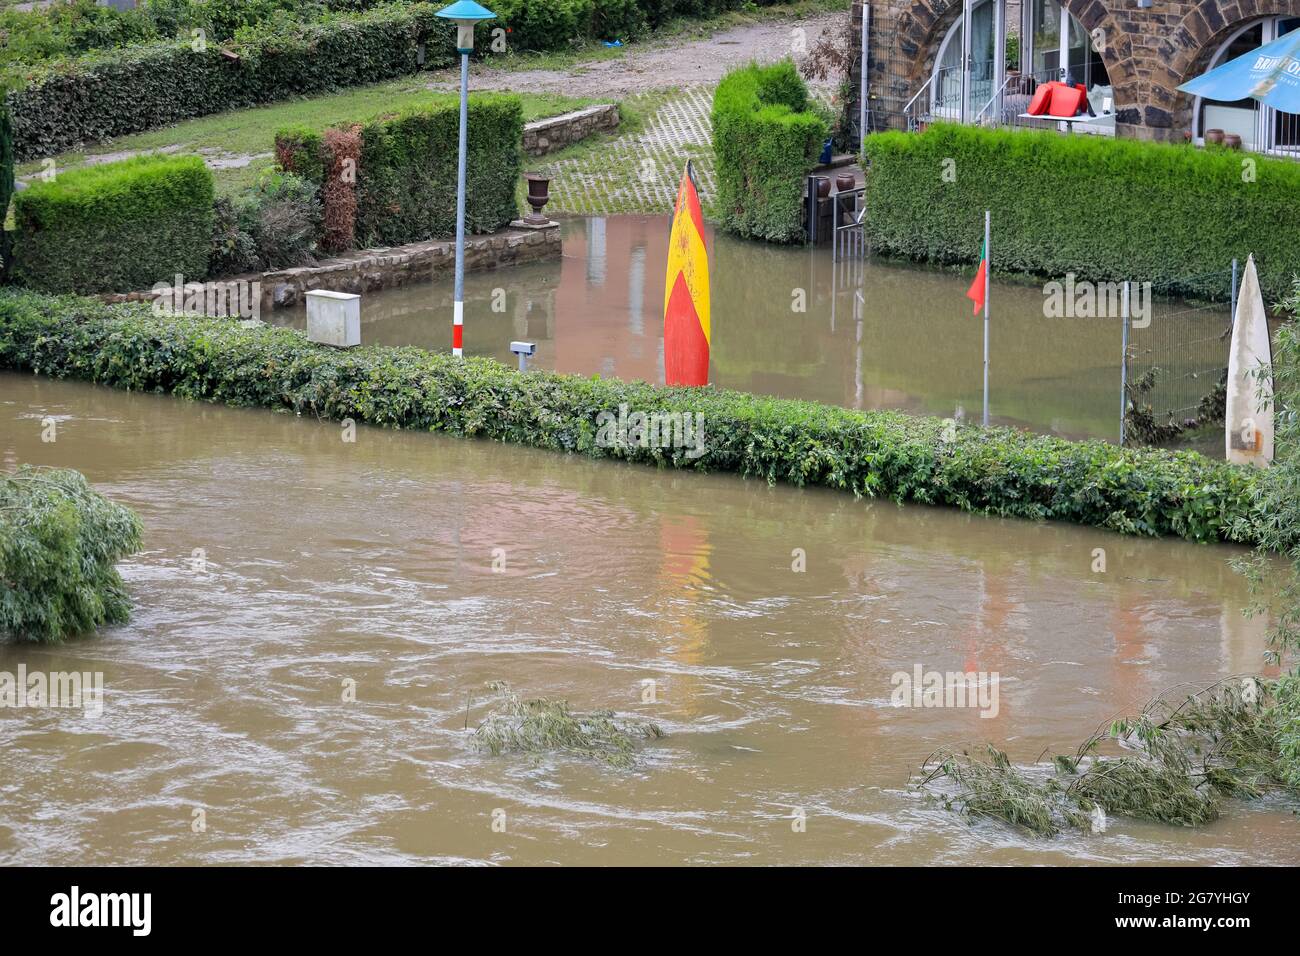 Hattingen, NRW, Germany. 16th July, 2021. Decorative surfboards in what used to be the outdoor restaurant seating of Hotel 'An der Kost'. The River Ruhr has flooded its embankment, fields and